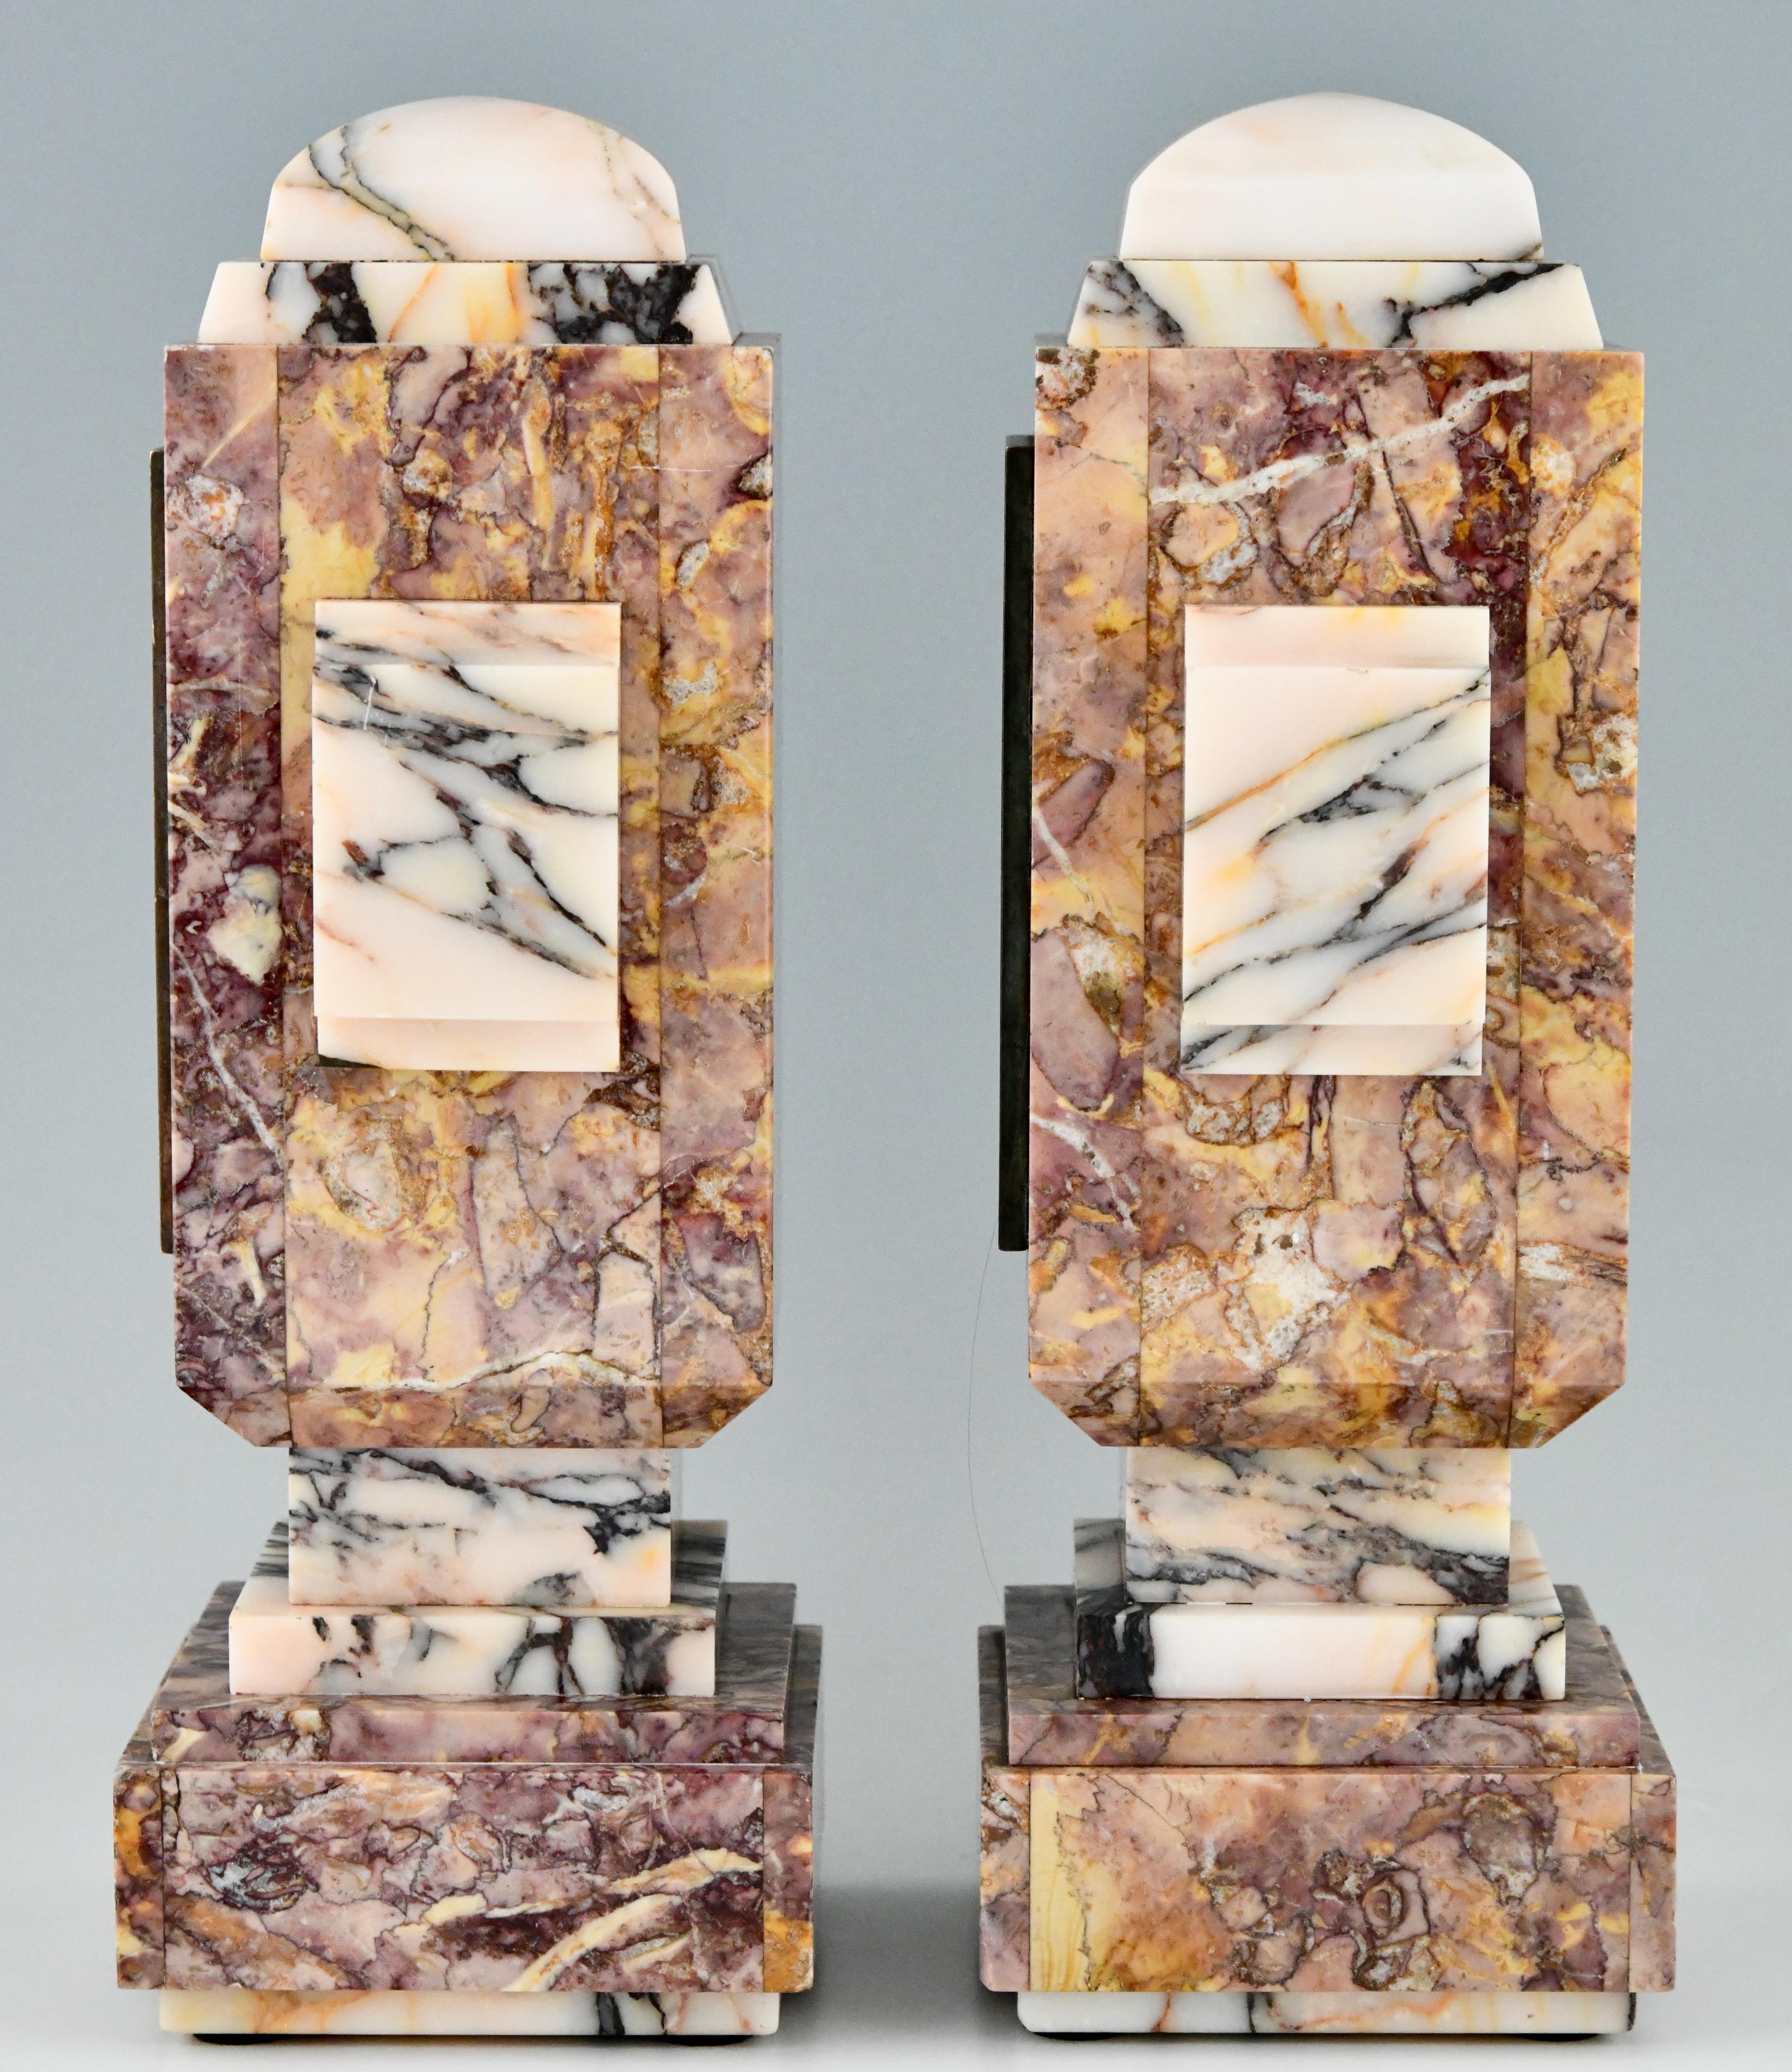 Pair of French Art Deco marble and bronze cassoulet vases with elephants. Ca. 1925. Marble and bronze.